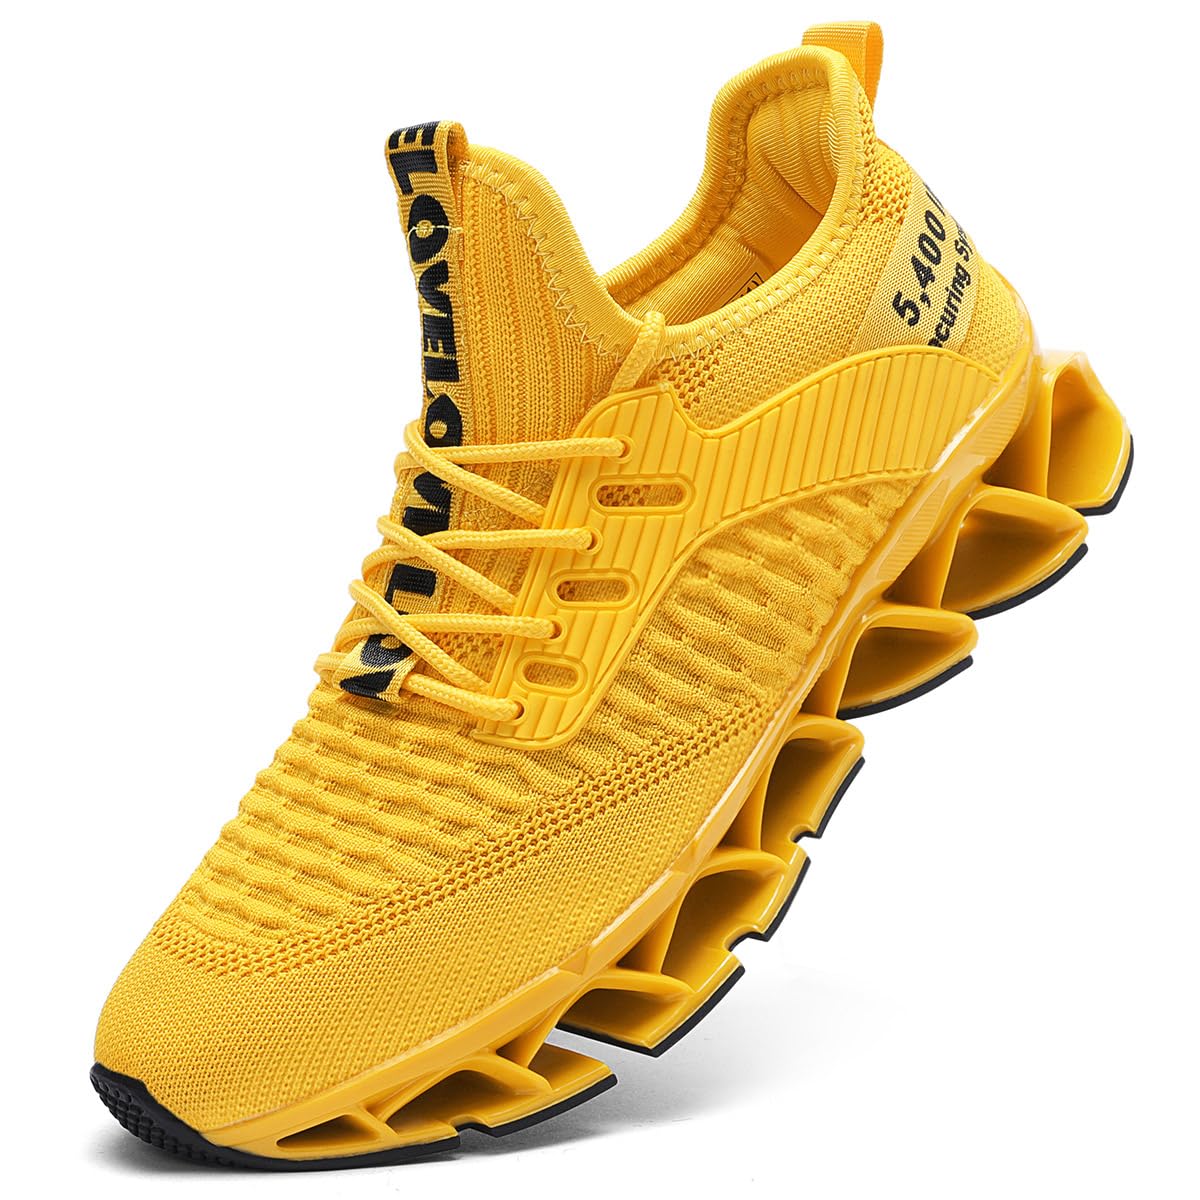 Vooncosir Women's Running Shoes Comfortable Fashion Non Slip Blade Sneakers Work Tennis Walking Sport Athletic Shoes Yellow